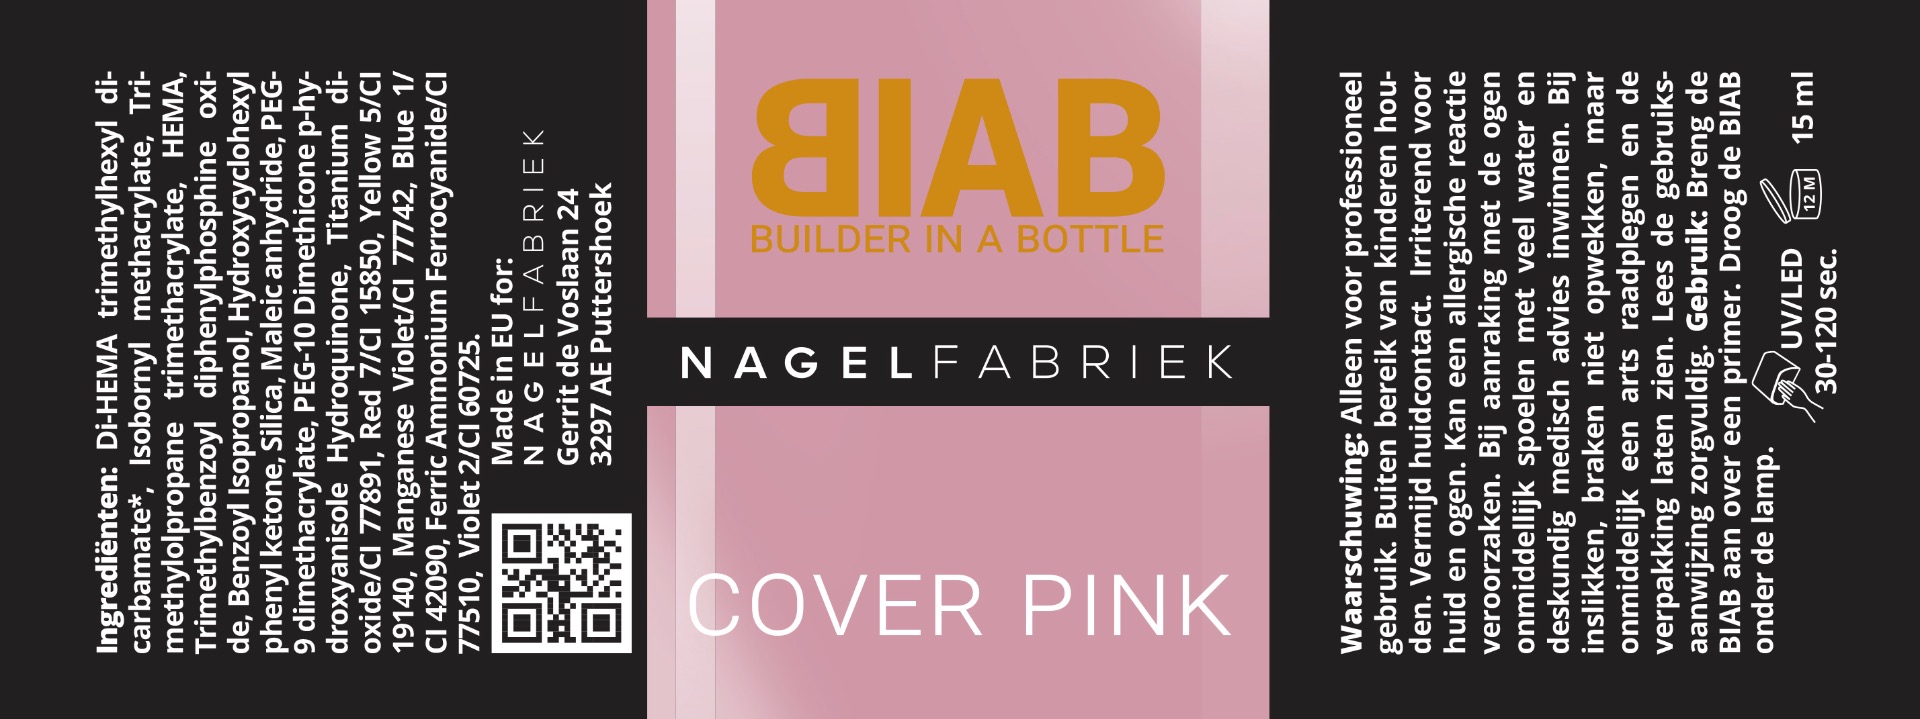 Label Builder In a Bottle Cover Pink - BIAB